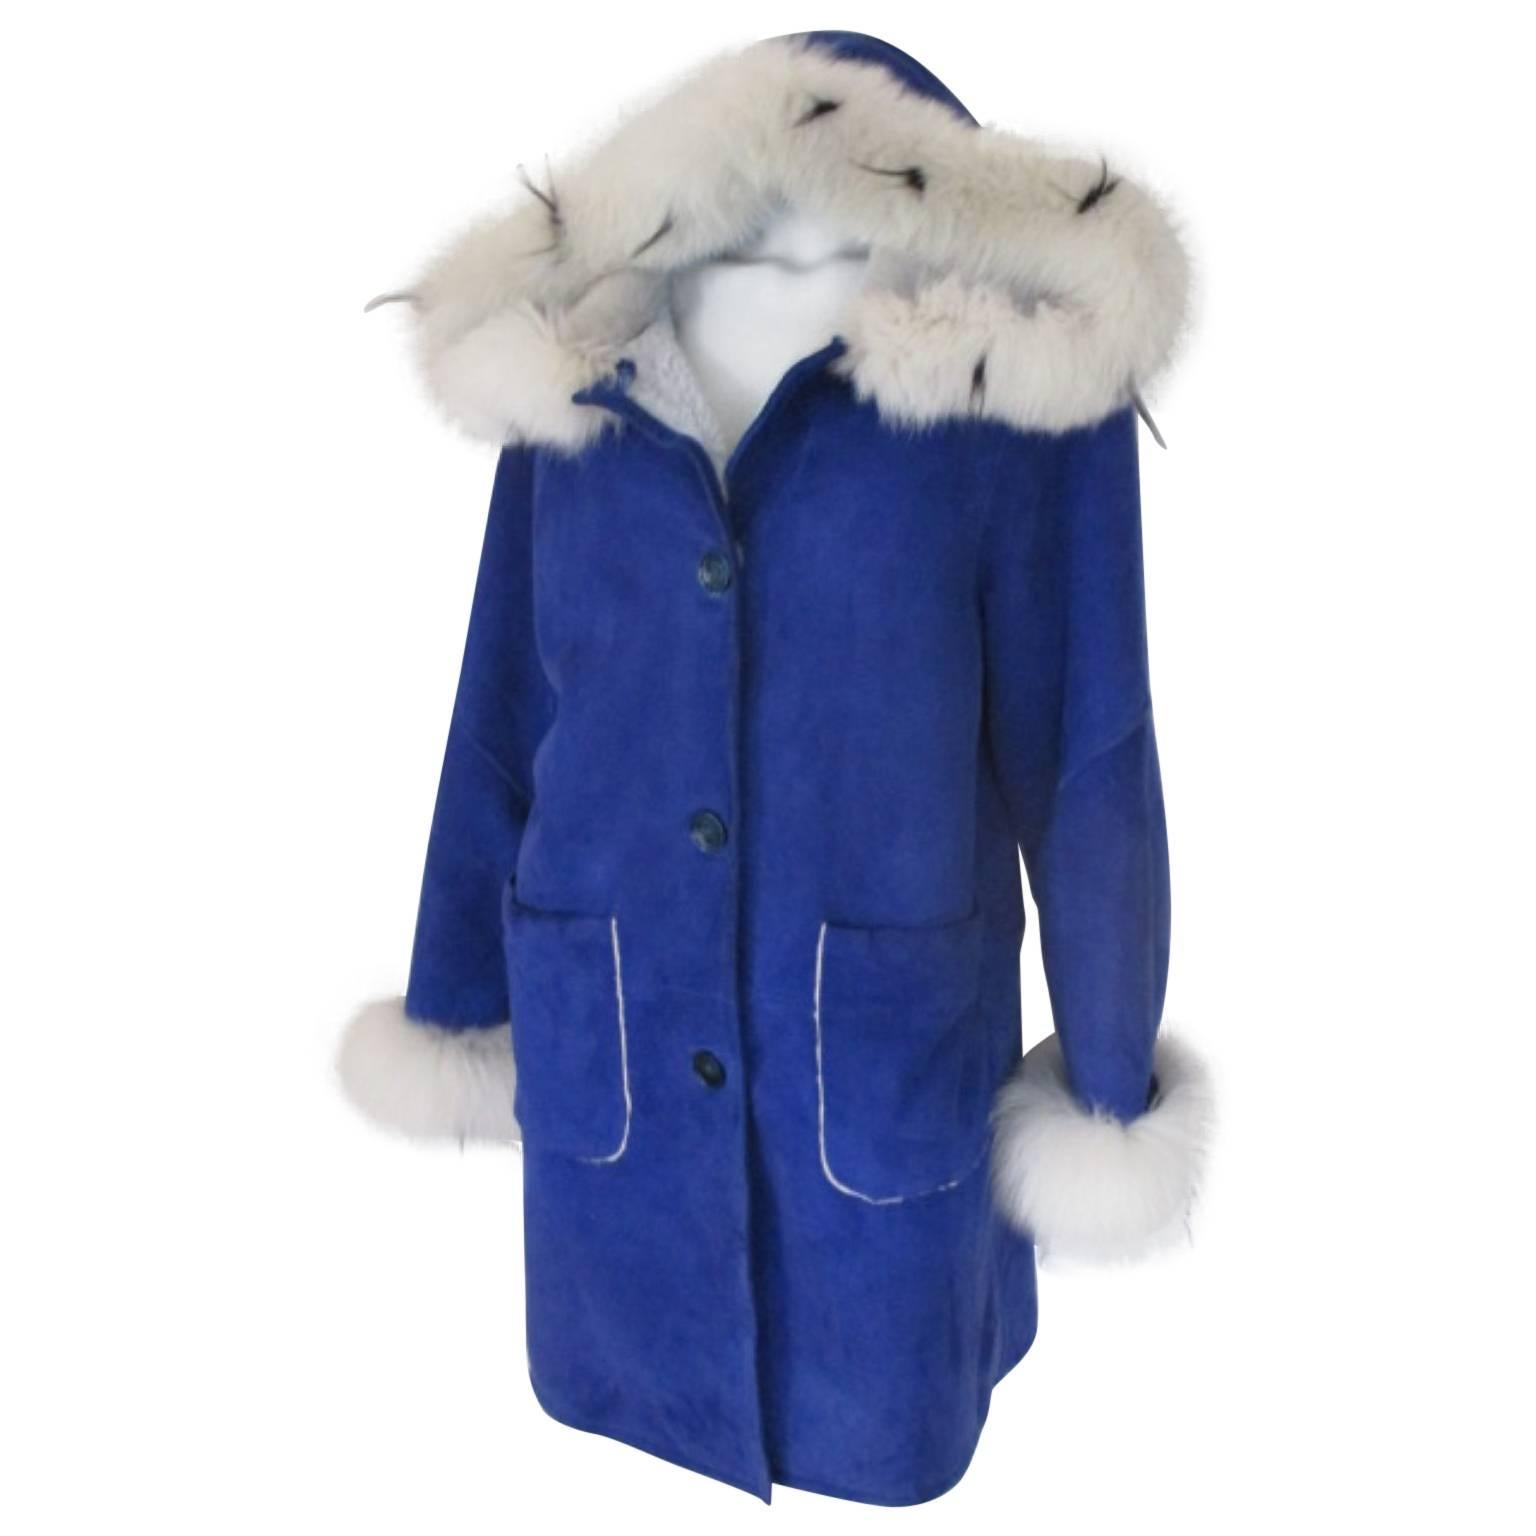 Hooded Cobalt Blue Soft Shearling Coat with Fox Fur